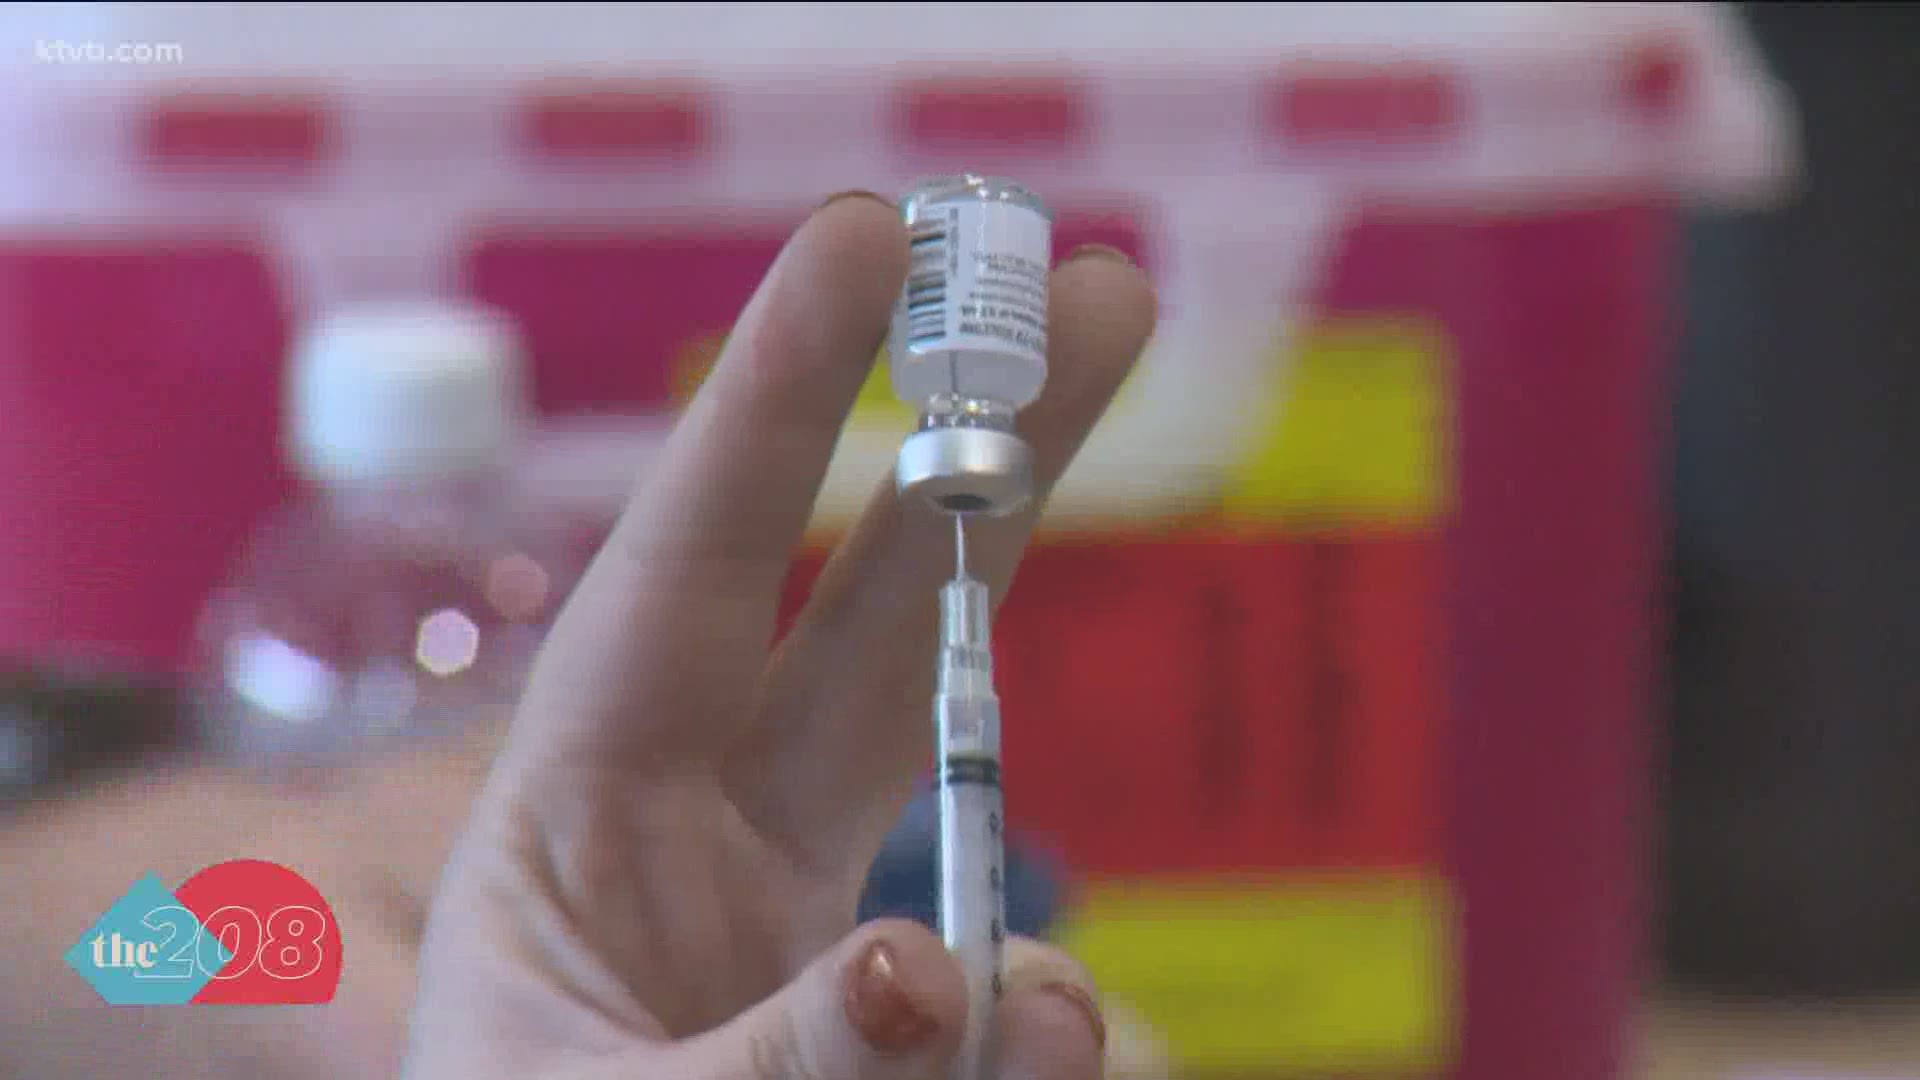 Idaho health experts say the data shows that people who are not vaccinated are the ones dying from COVID-19.